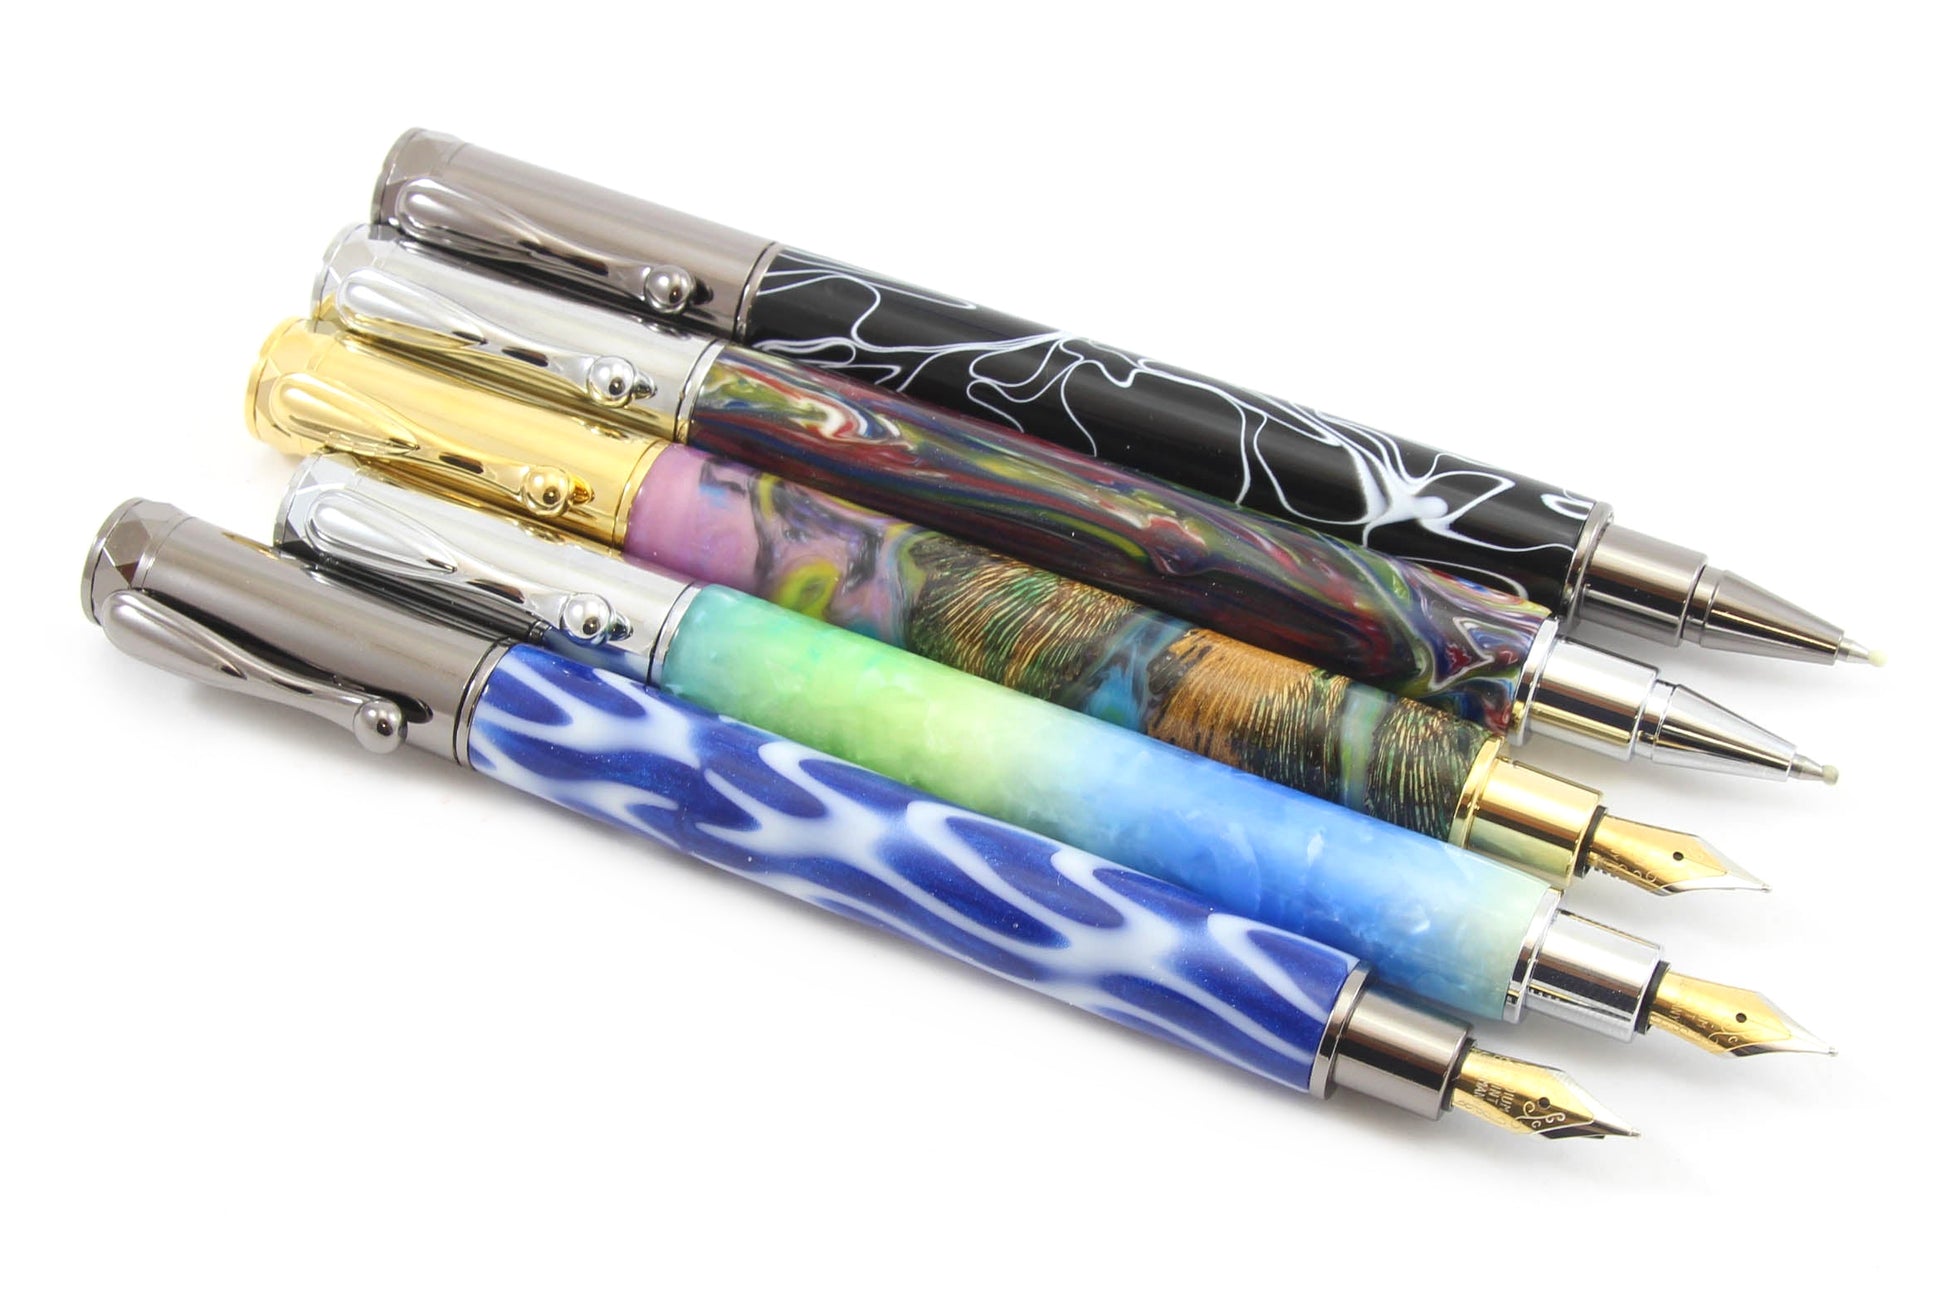 Magnetic Zen Rollerball and Fountain Pen Kit Group Image